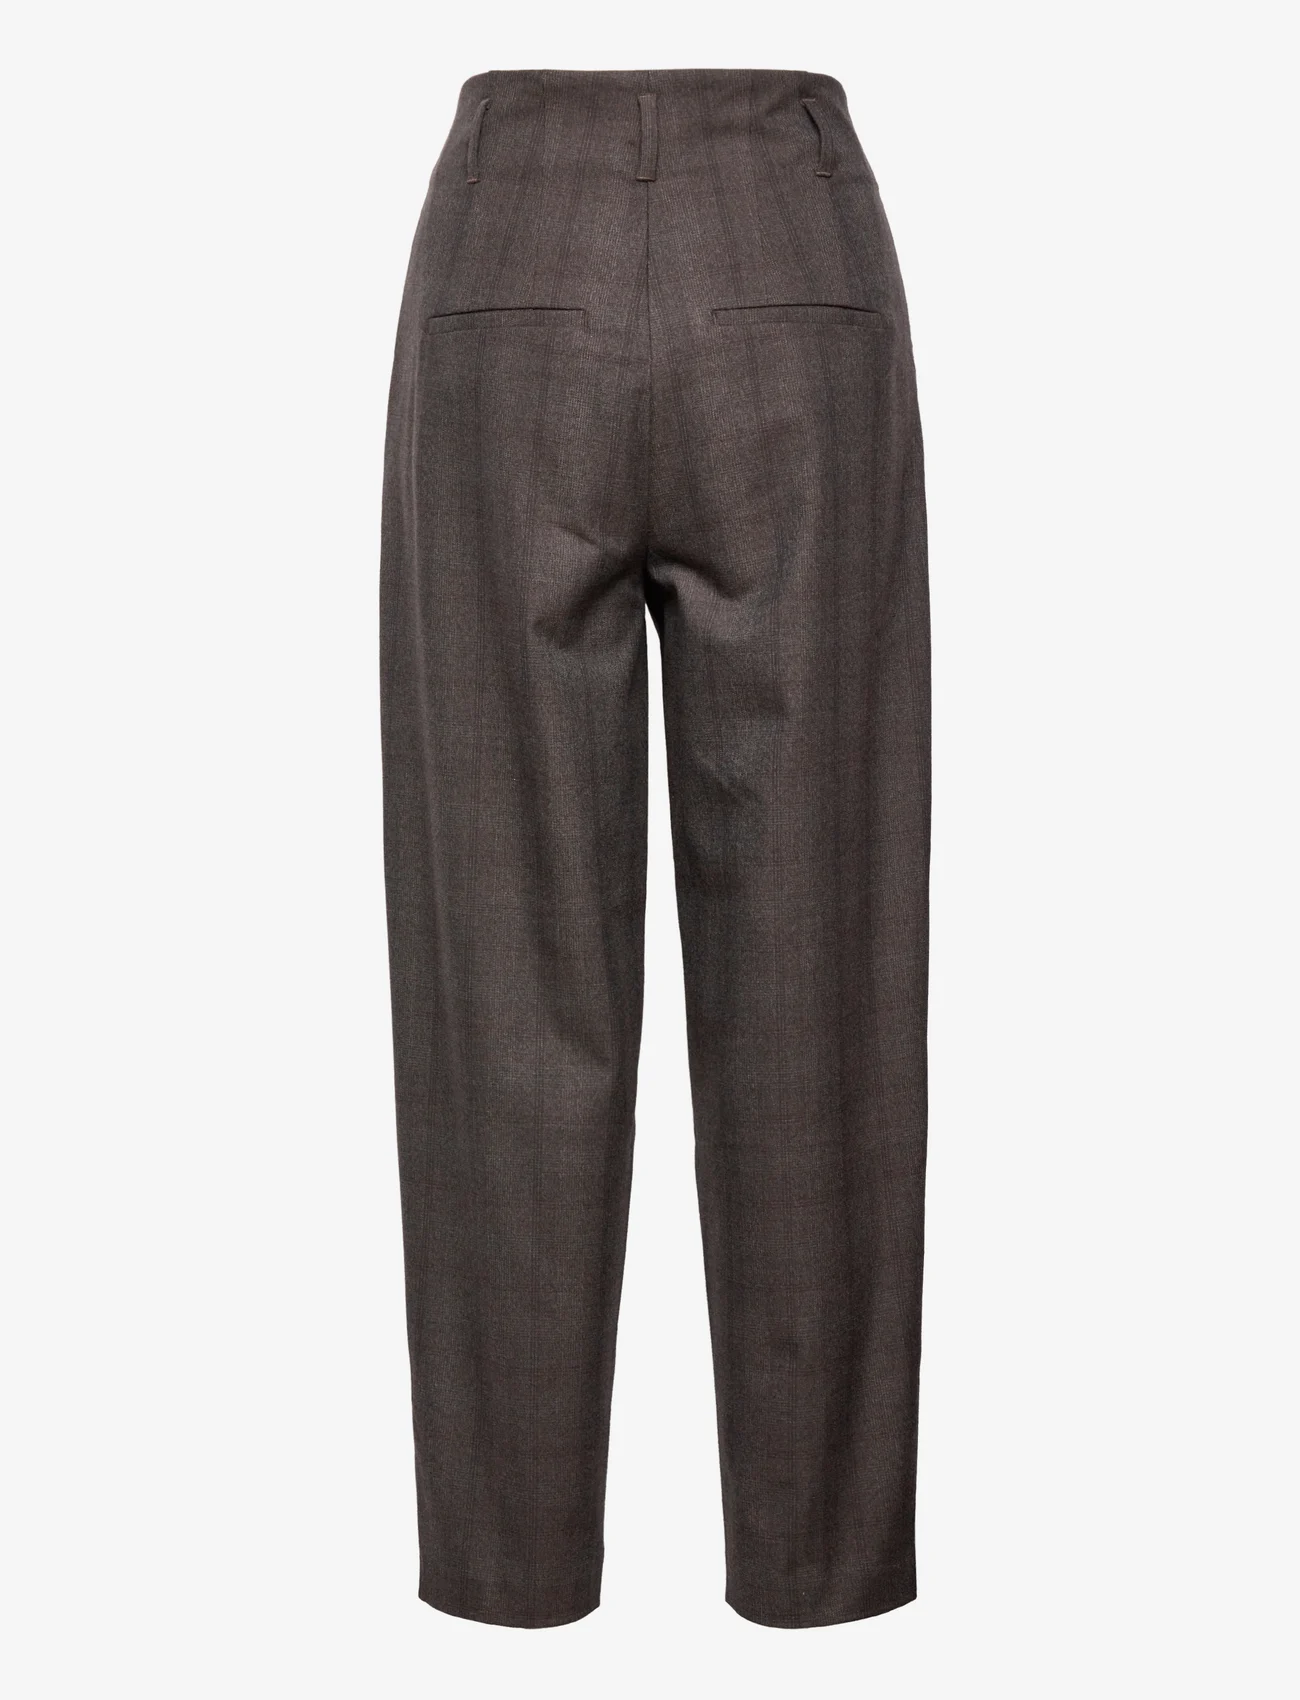 FIVEUNITS - Hailey - tailored trousers - brown check - 1